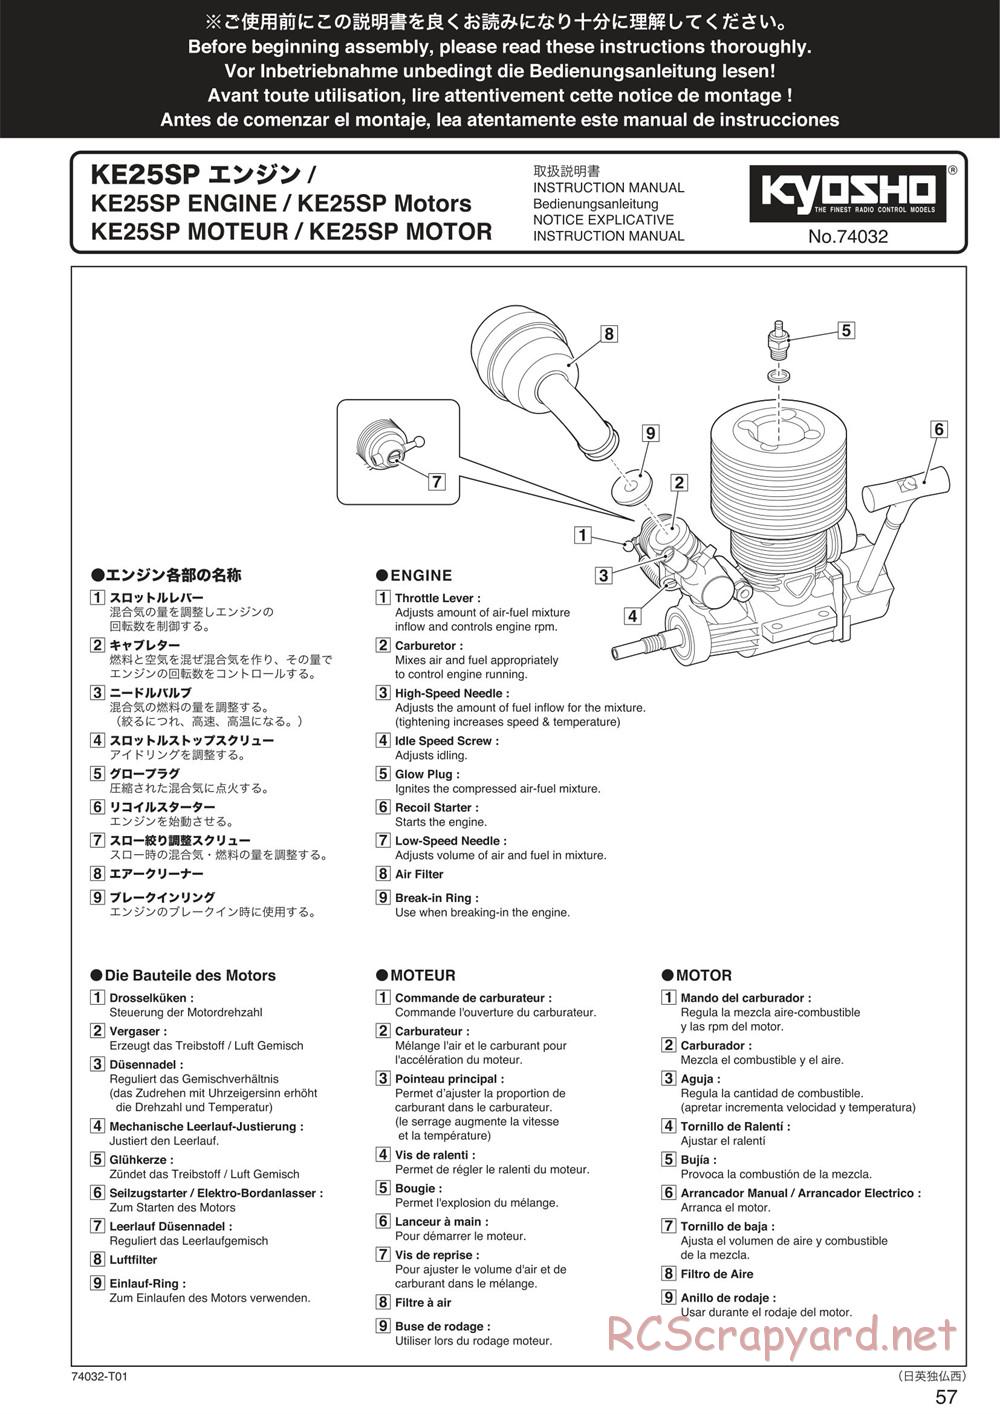 Kyosho - Inferno Neo ST 3.0 - Manual - Page 57